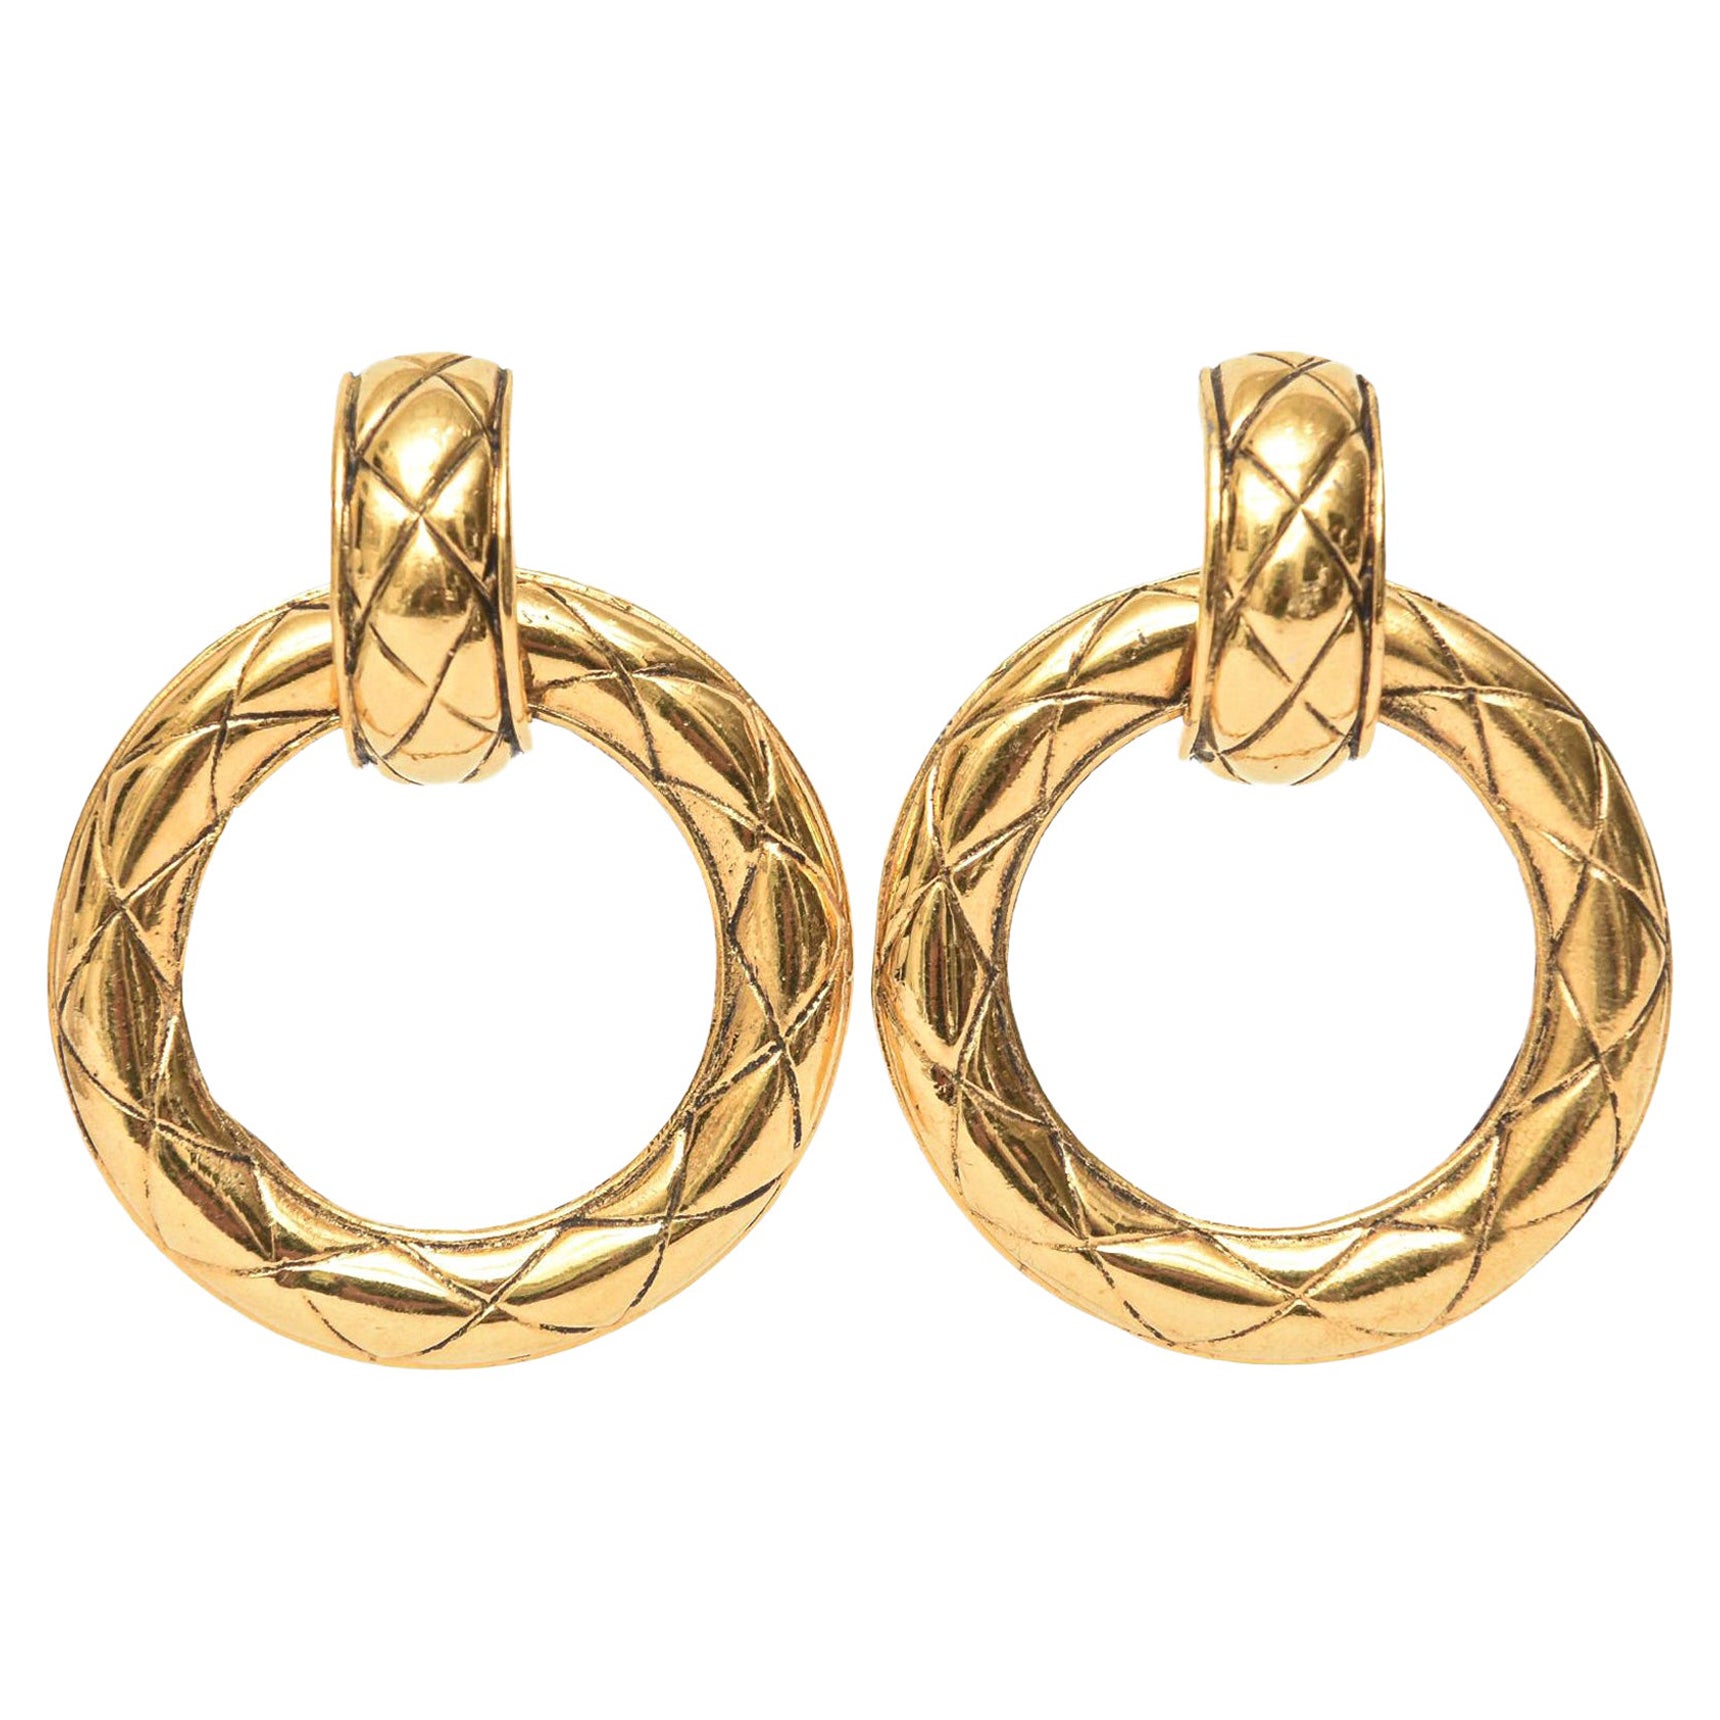 Chanel Quilted Gold Plated Door Knocker Clip On Earrings Pair Of 80's